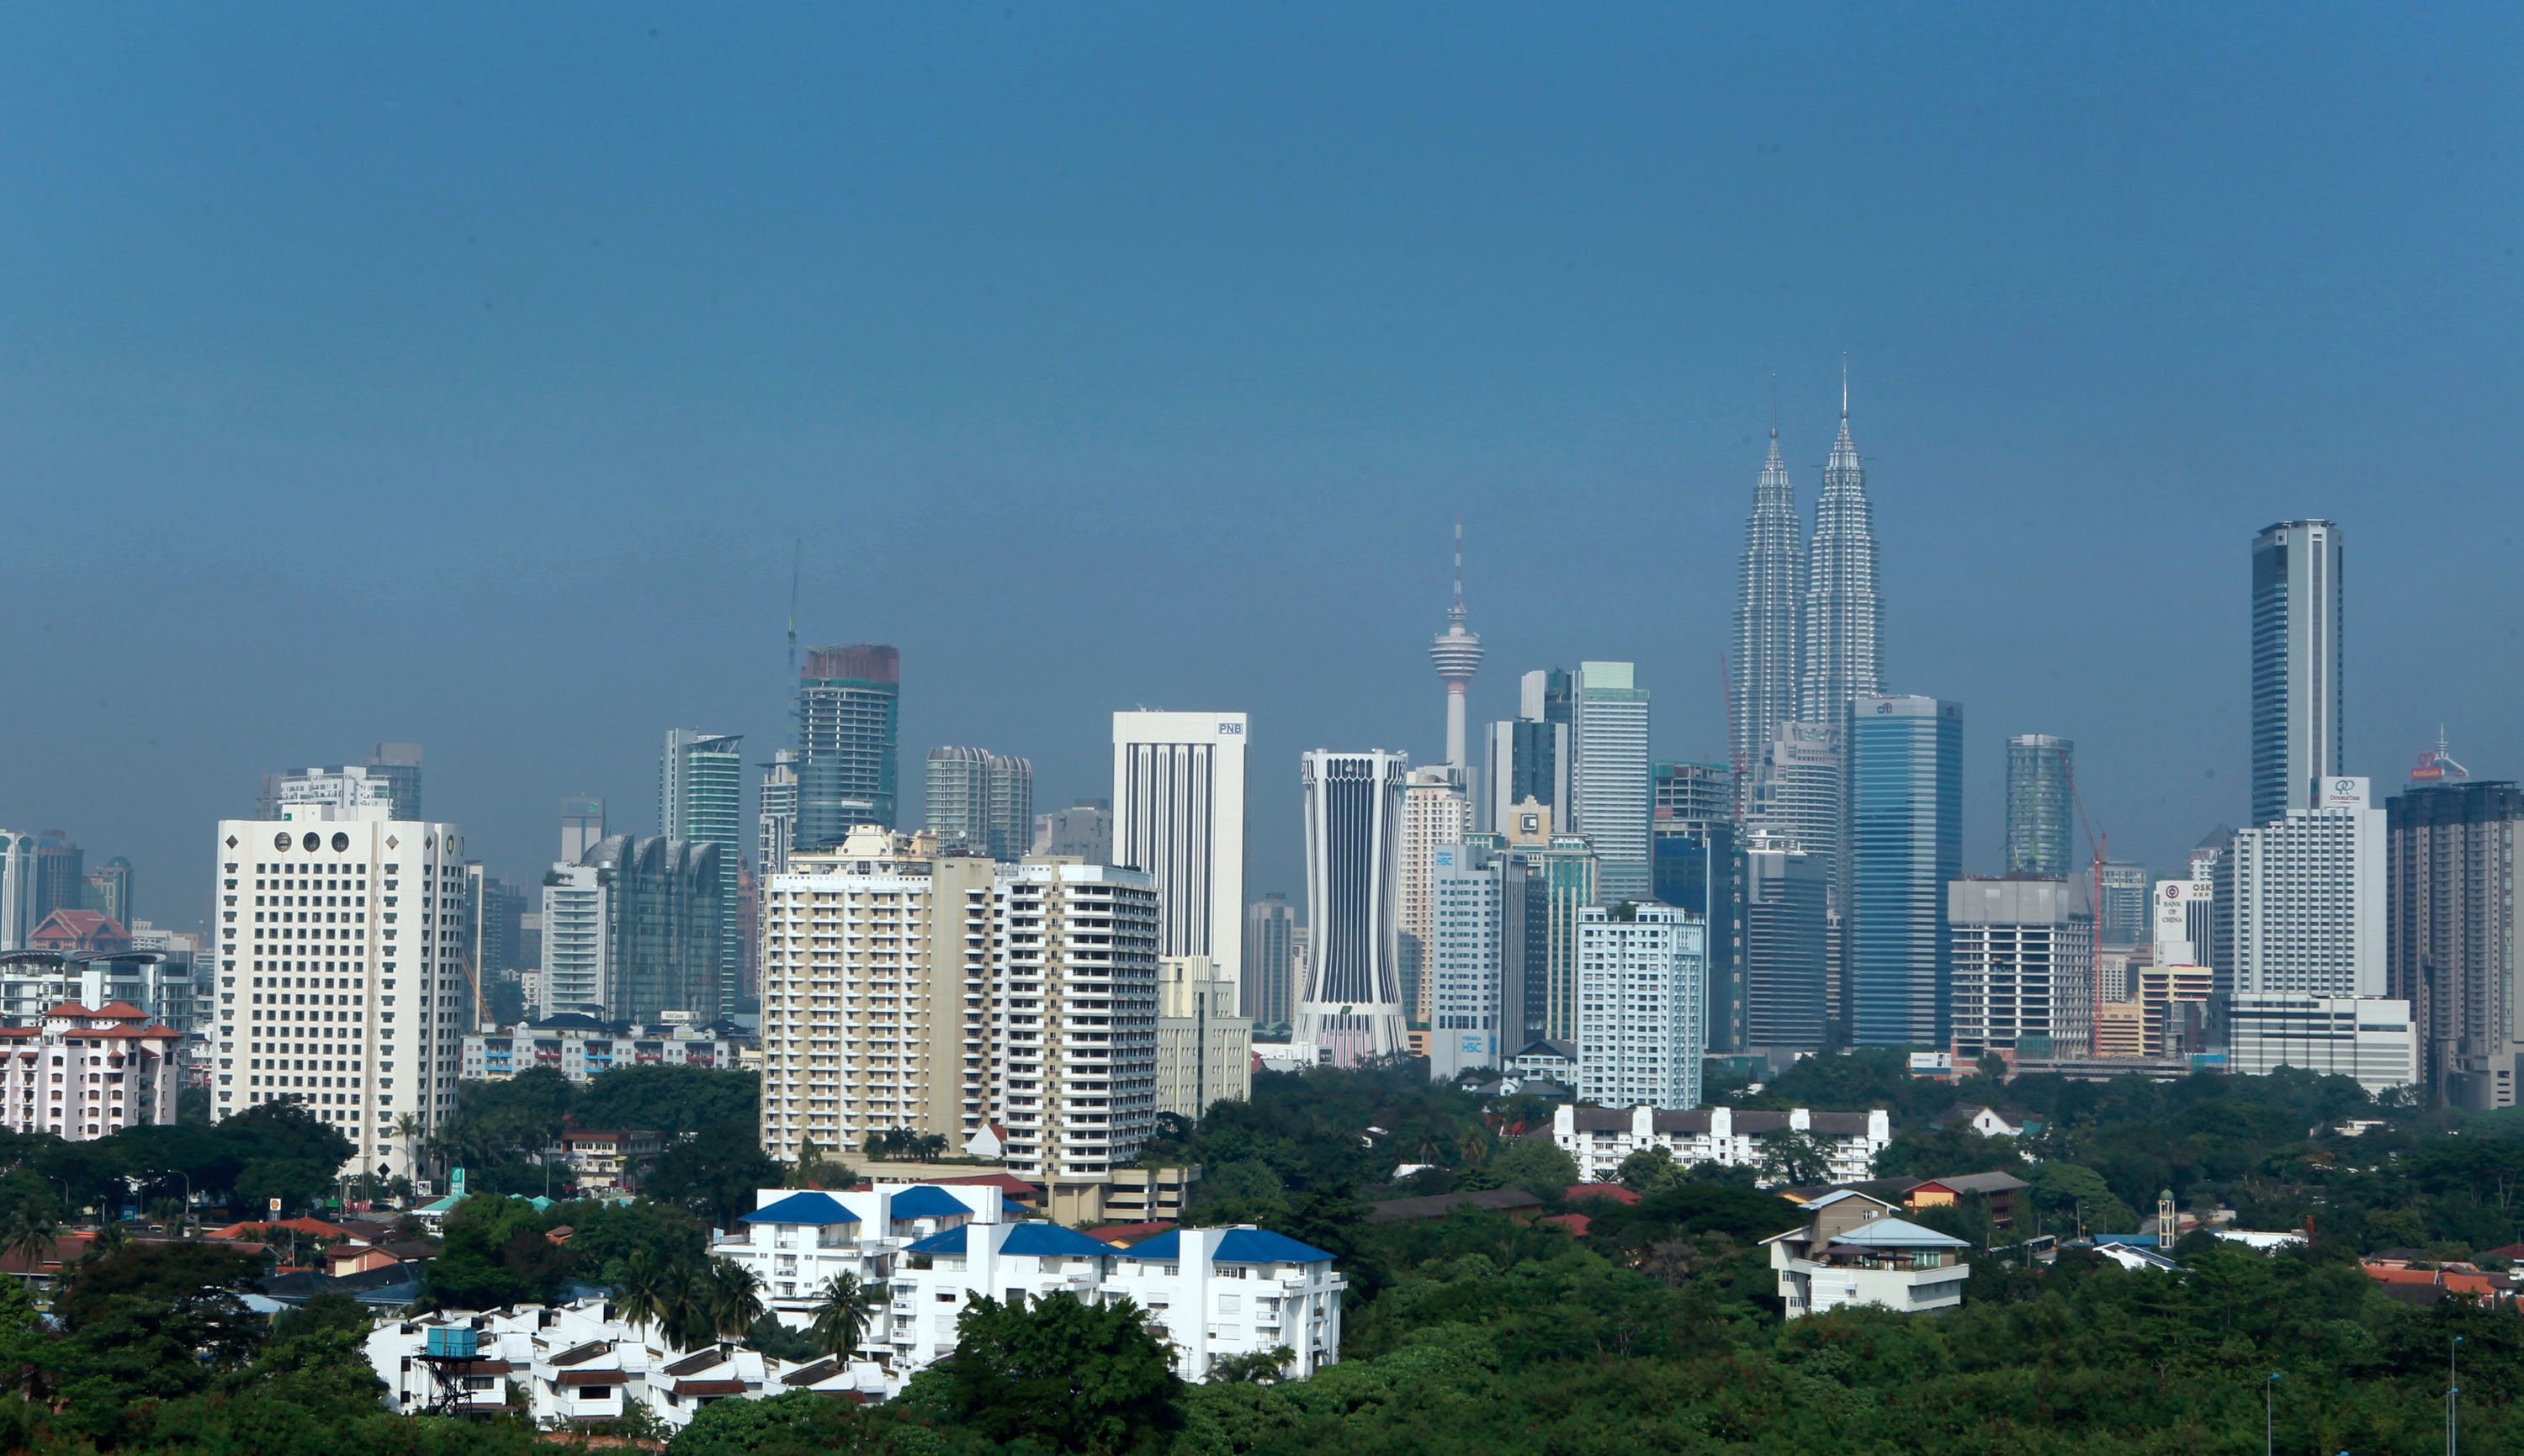 Private consumption and household spending have helped the Malaysian economy to continue to expand in recent times. Photo: Bloomberg